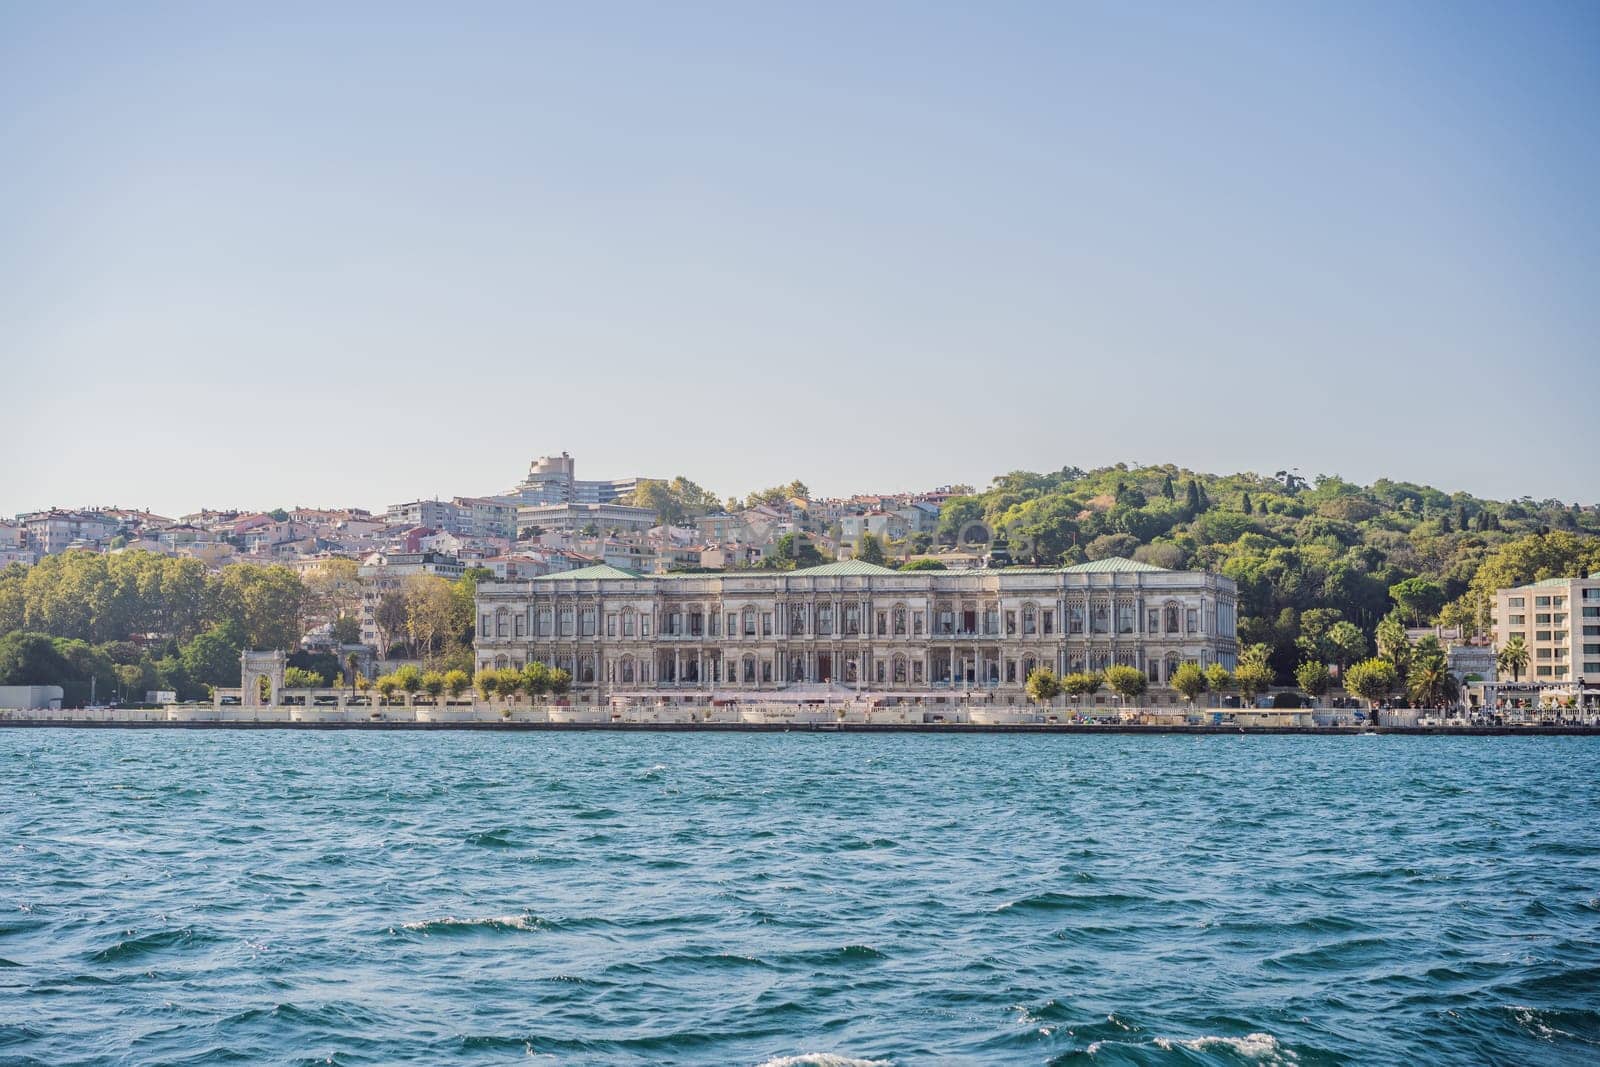 landscape scenery of Dolmabahce palacewith reflection, istanbul, turkey waterfront view from bosporus.